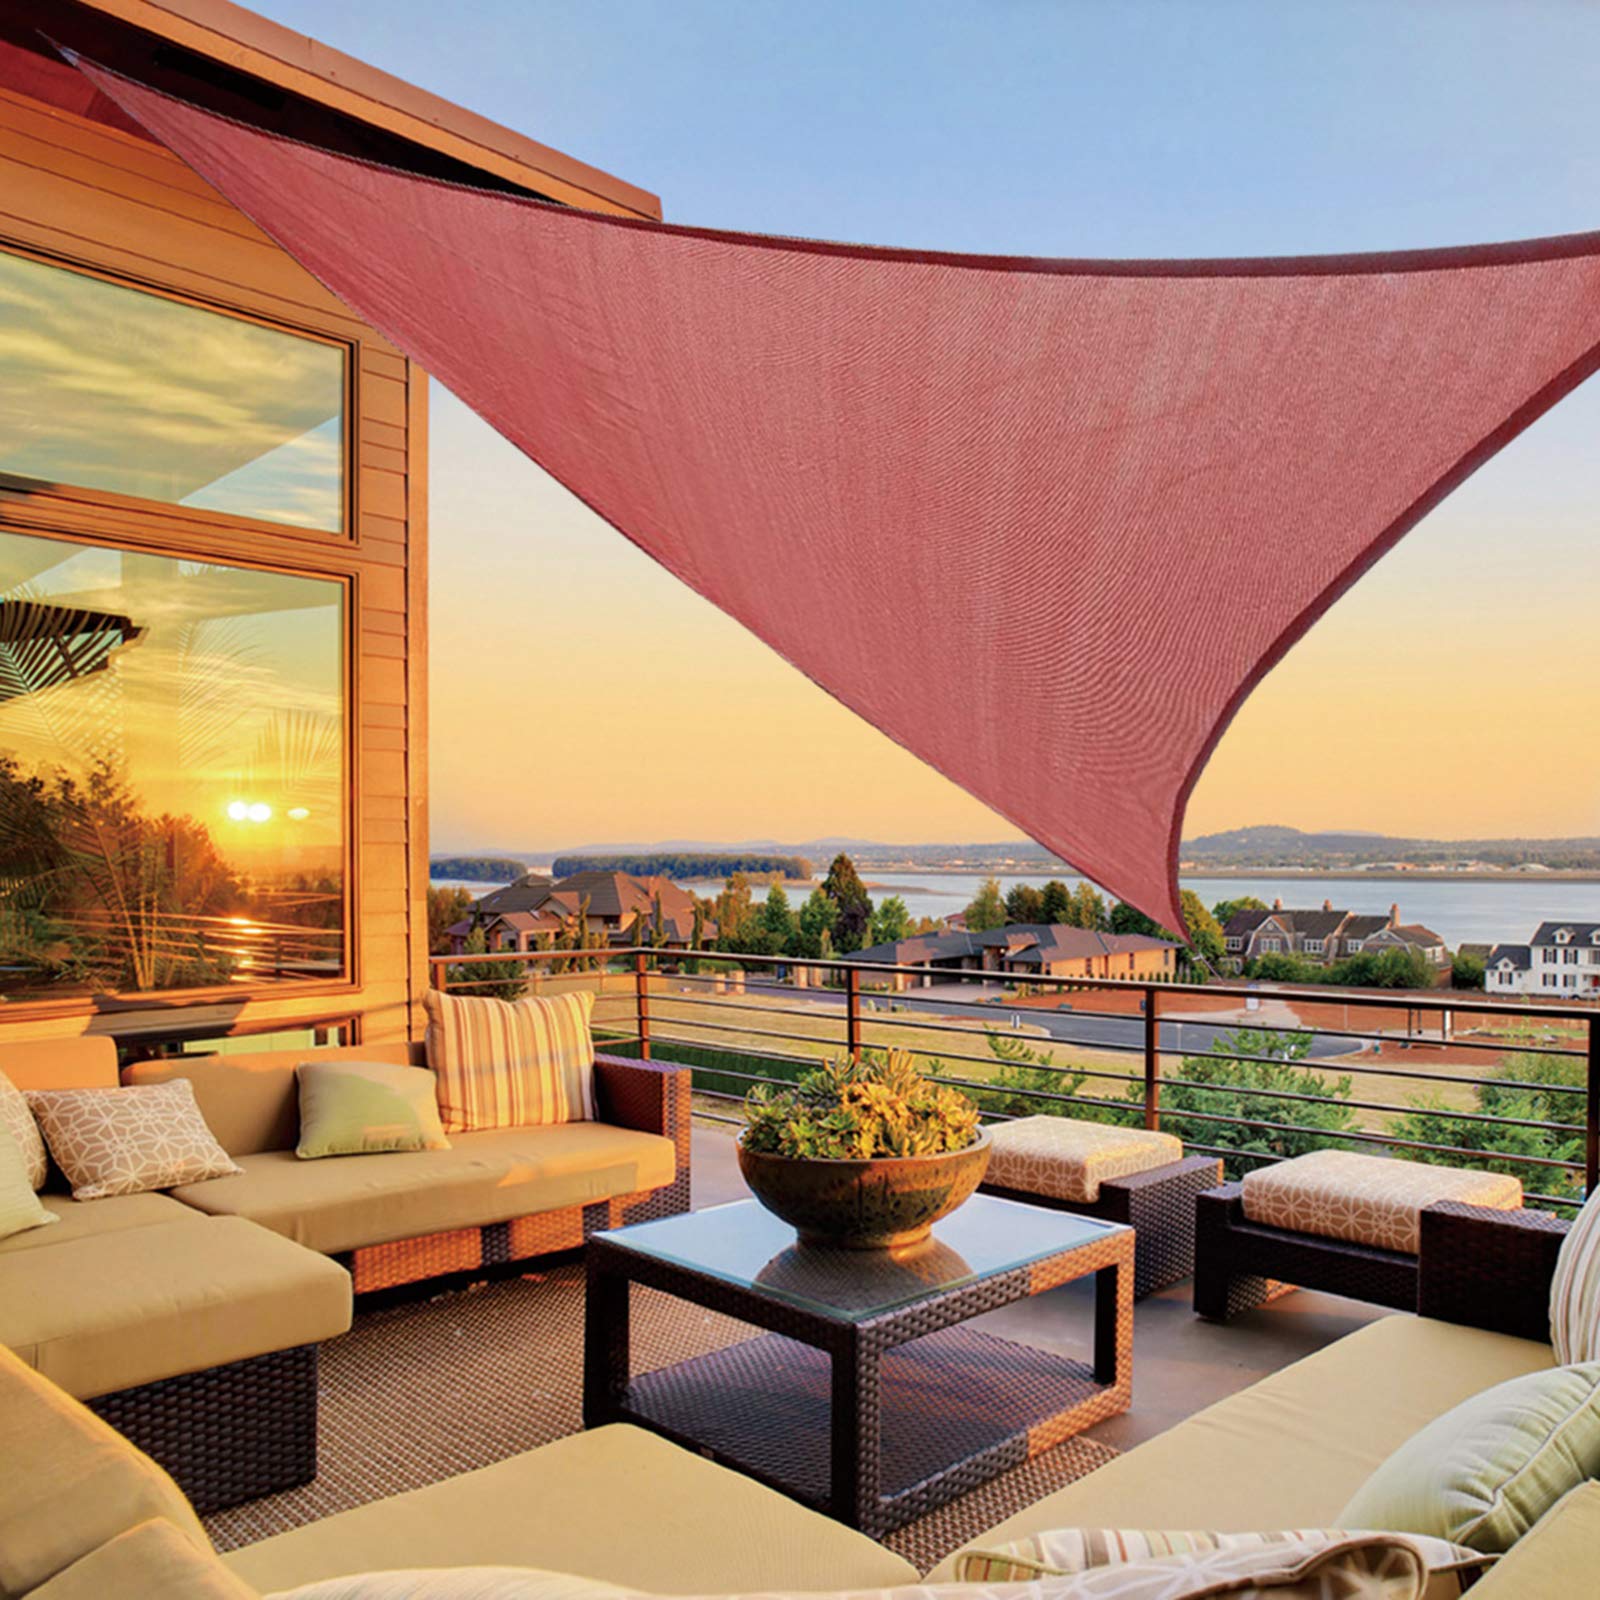 Need Shade in Your Yard This Summer. Try These 10 Shade Sail Options